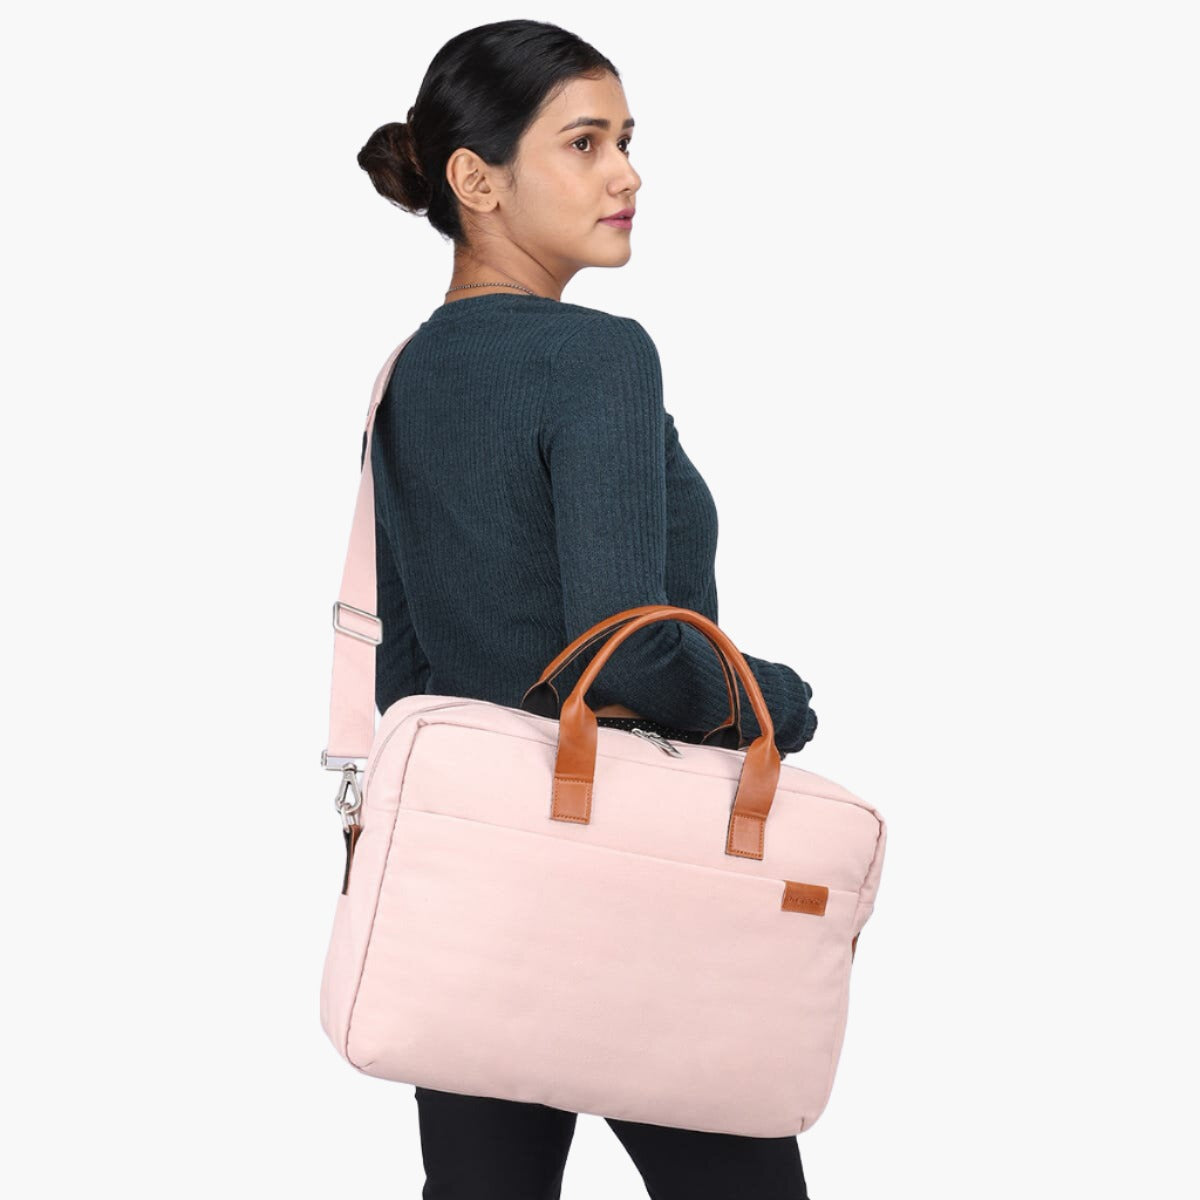 Pink | Protecta The Strong Buzz Office Laptop Bag - 4